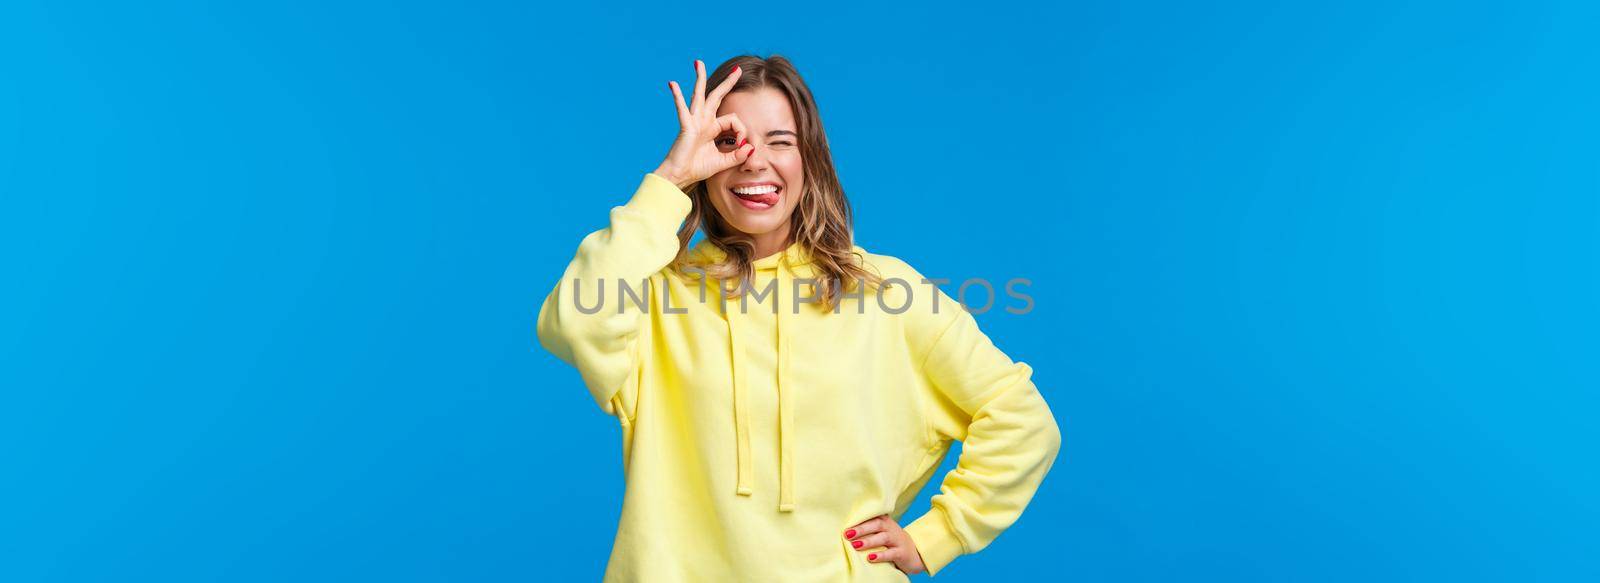 No problem, stay relaxed. Carefree and chill good-looking blond girl vibing, assure all okay nothing worry about, show tongue wink and look through okay gesture, blue background.